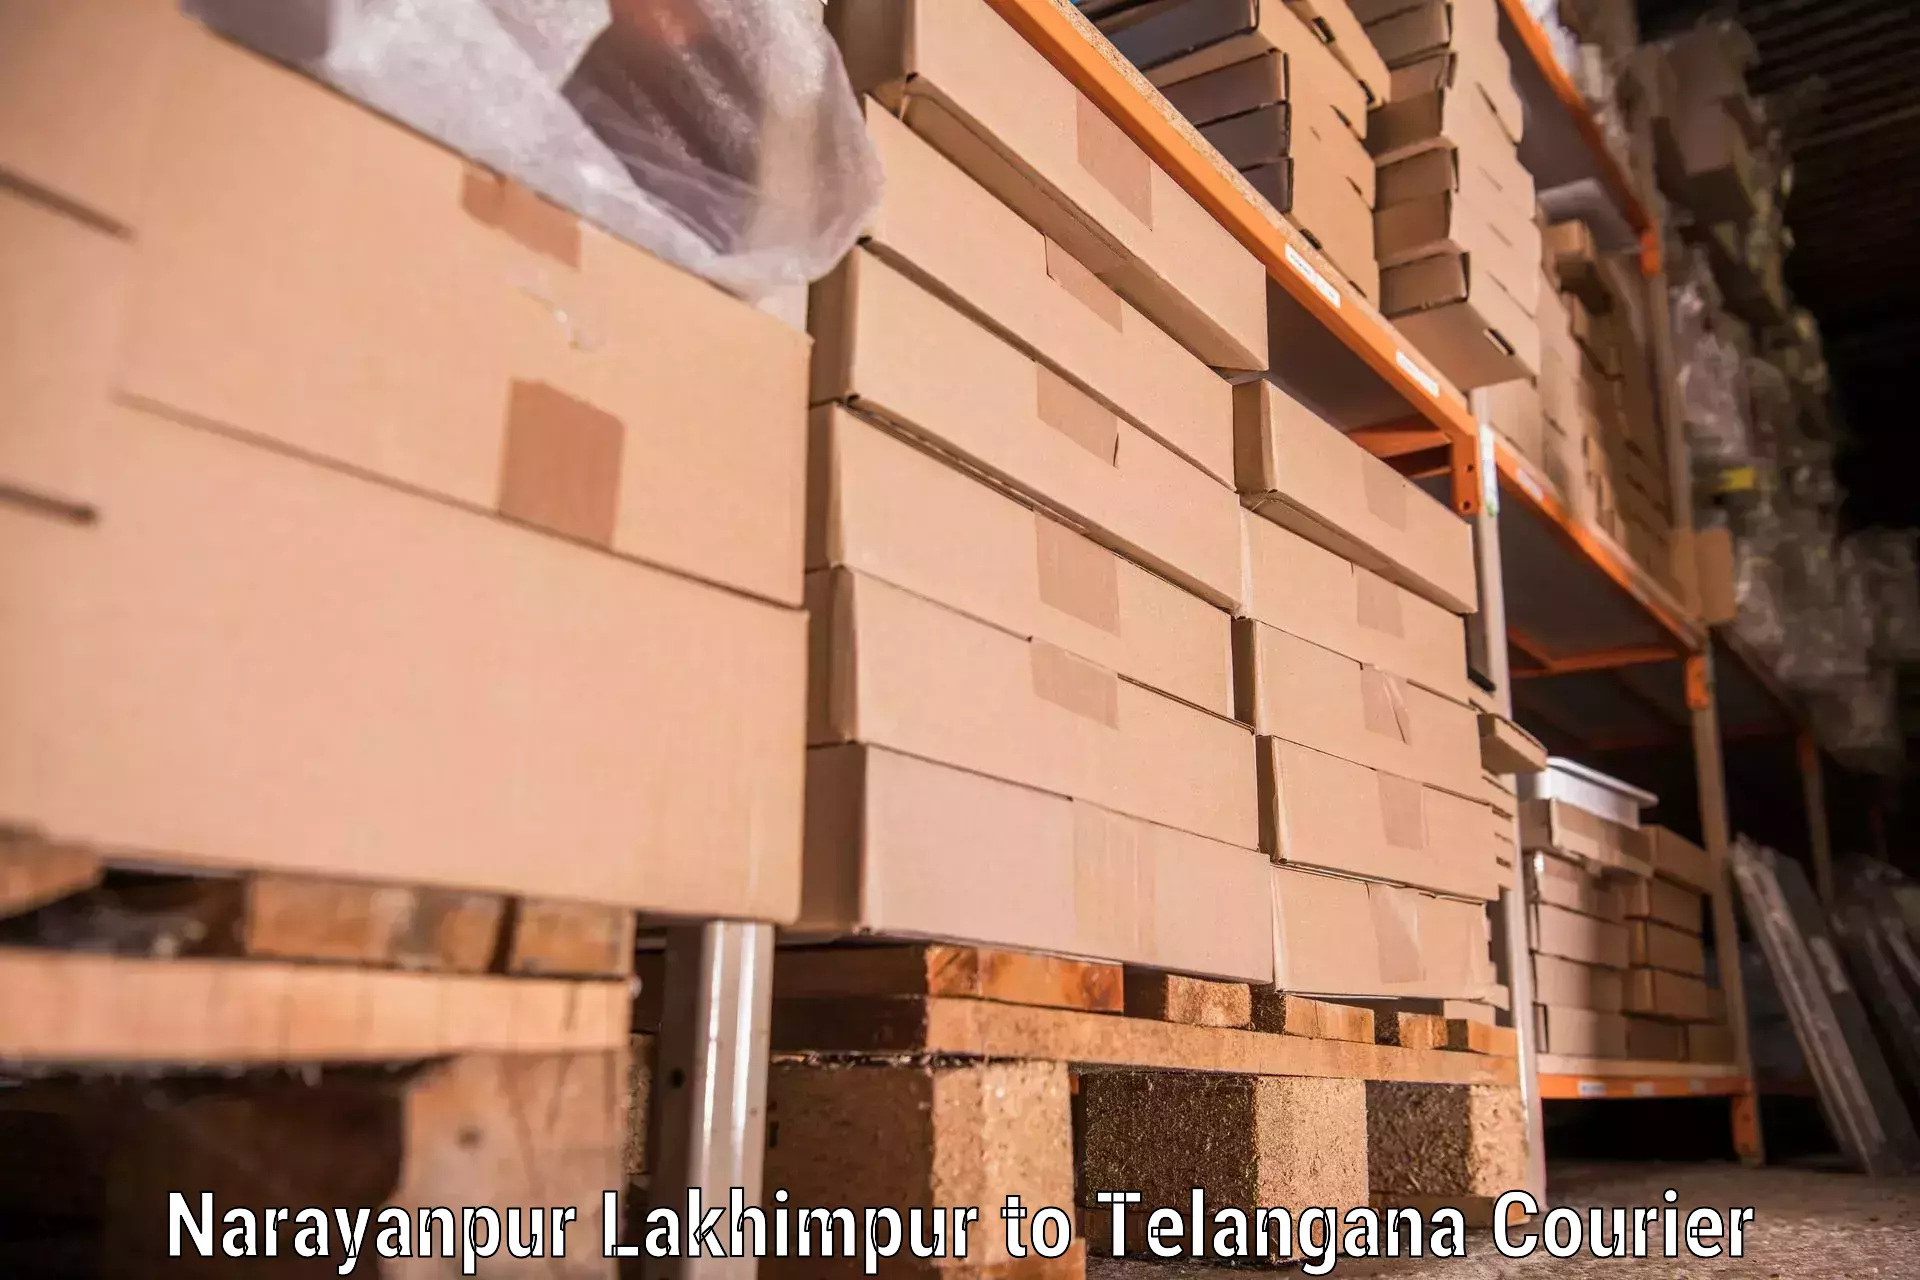 Professional home movers Narayanpur Lakhimpur to Manneguda